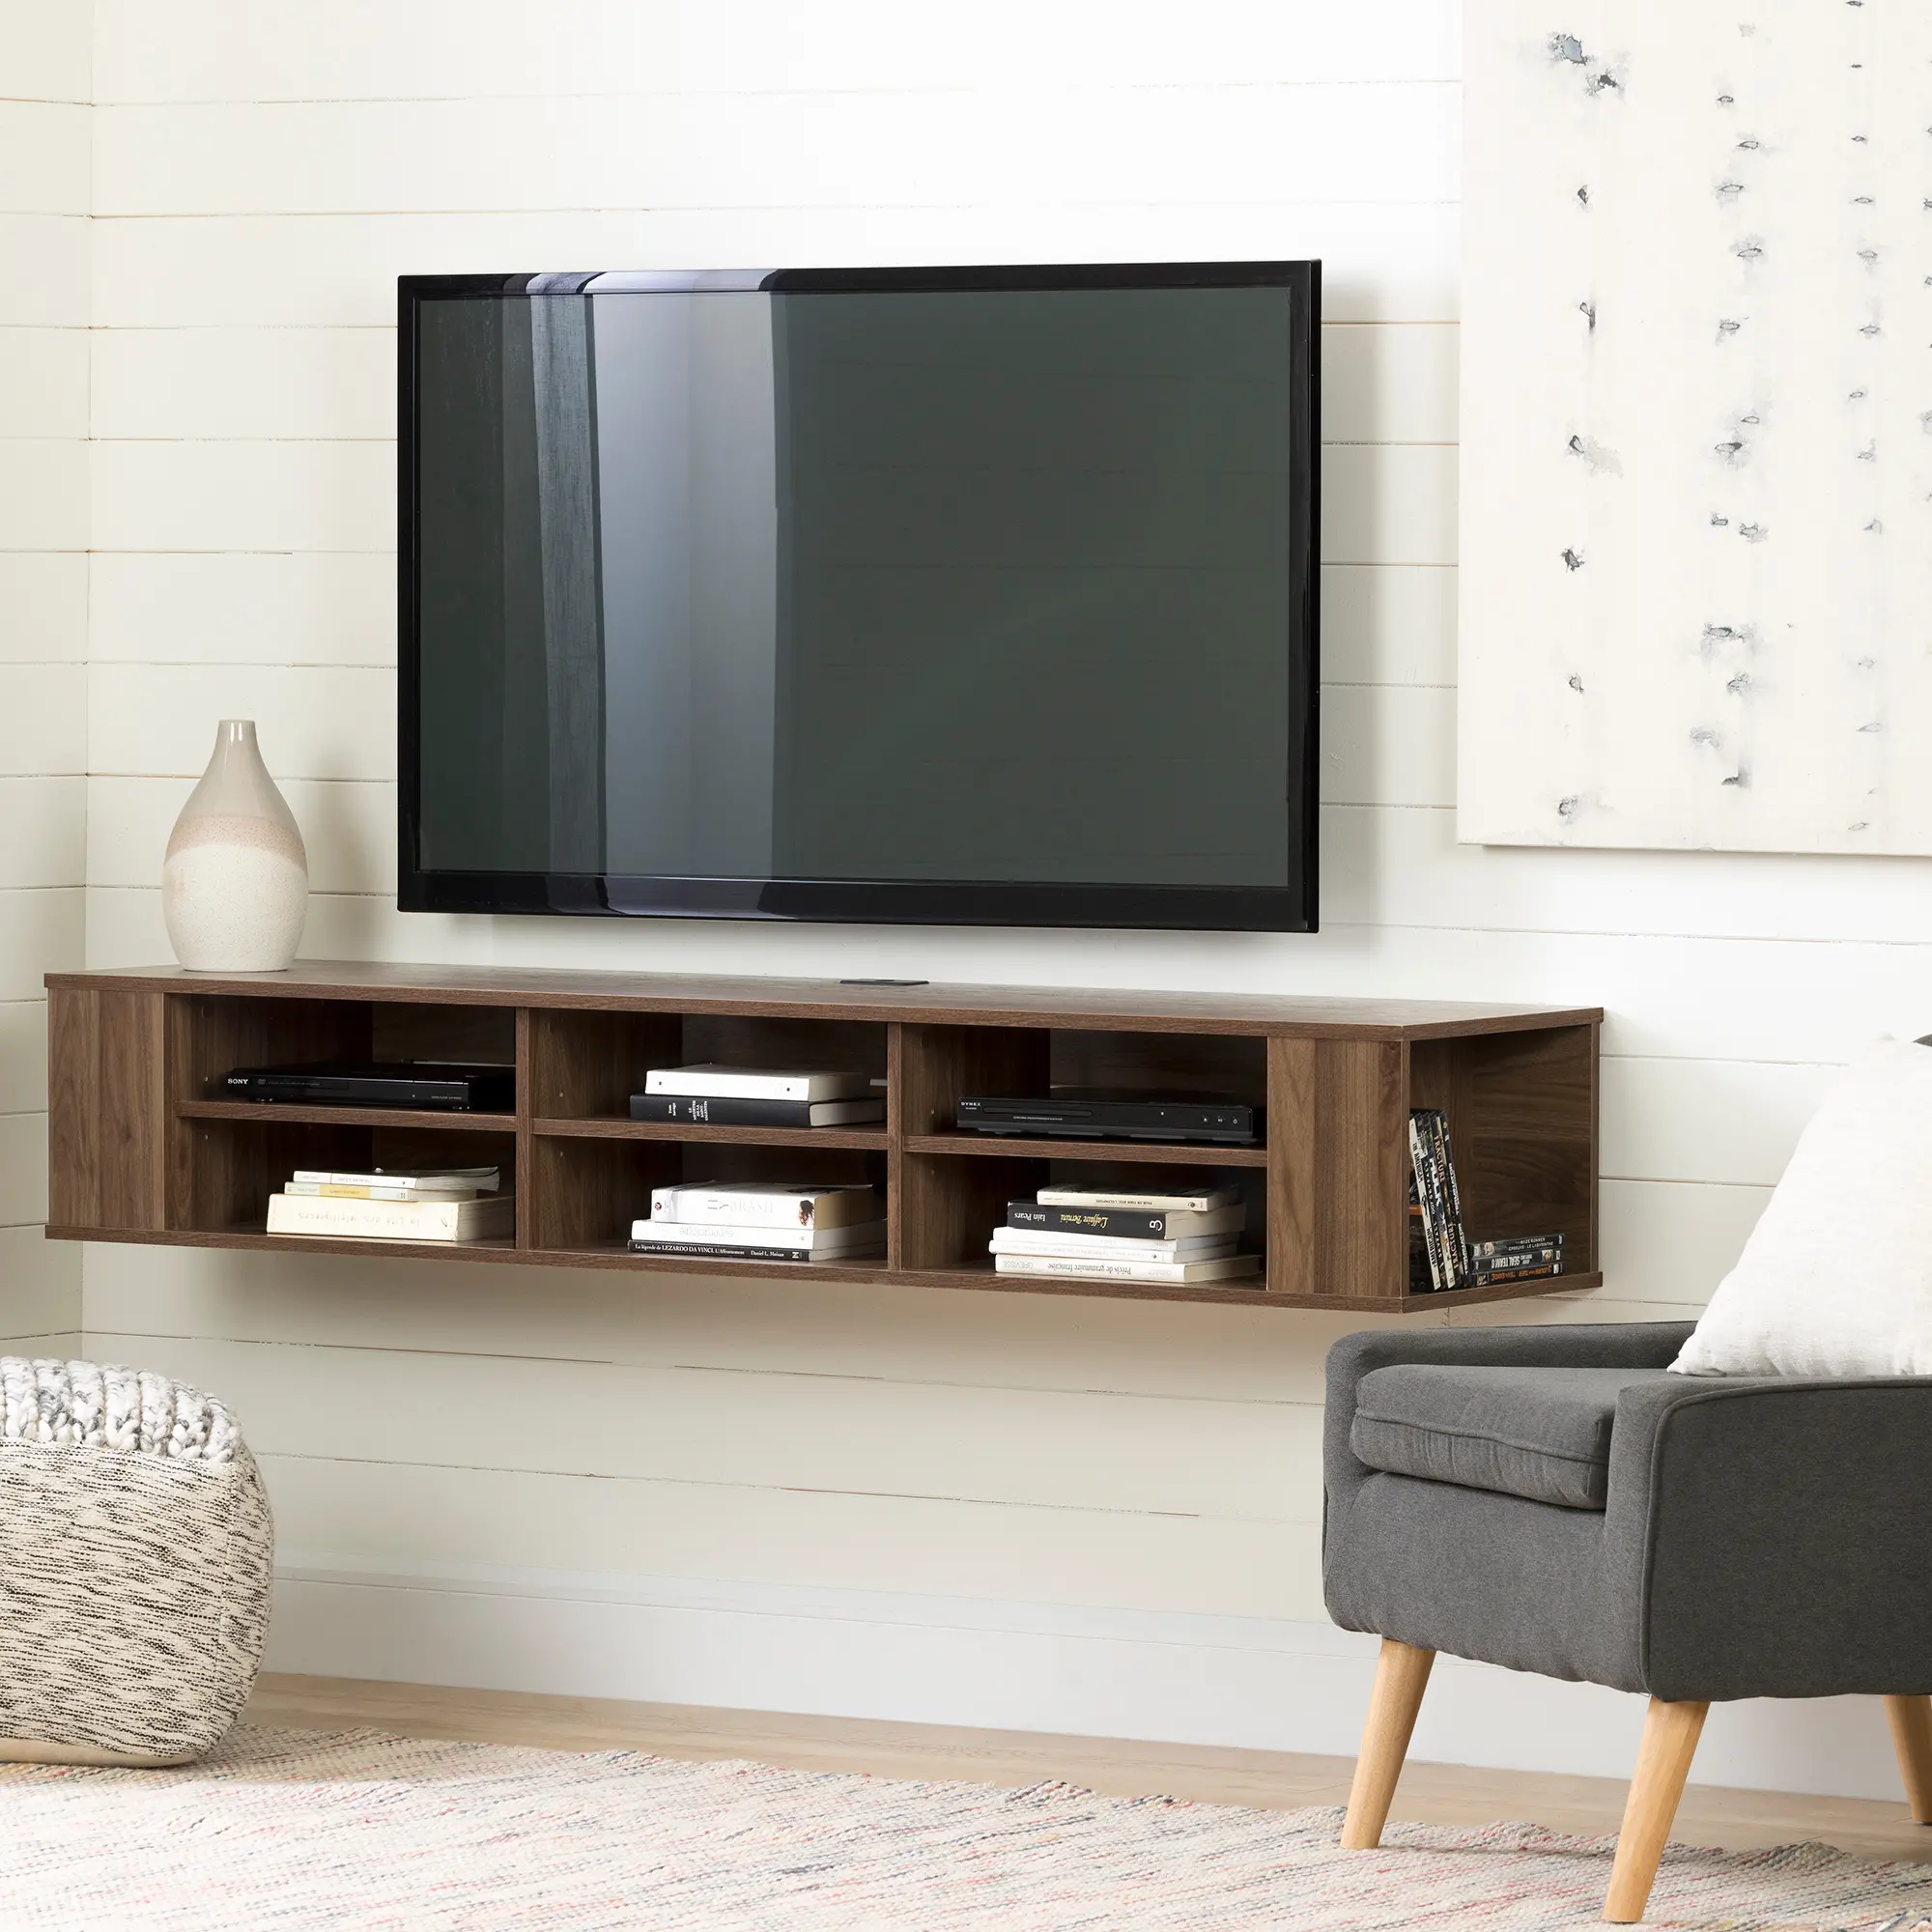 City Life Natural Walnut 66 Inch Wall Mounted TV Stand - South Shore